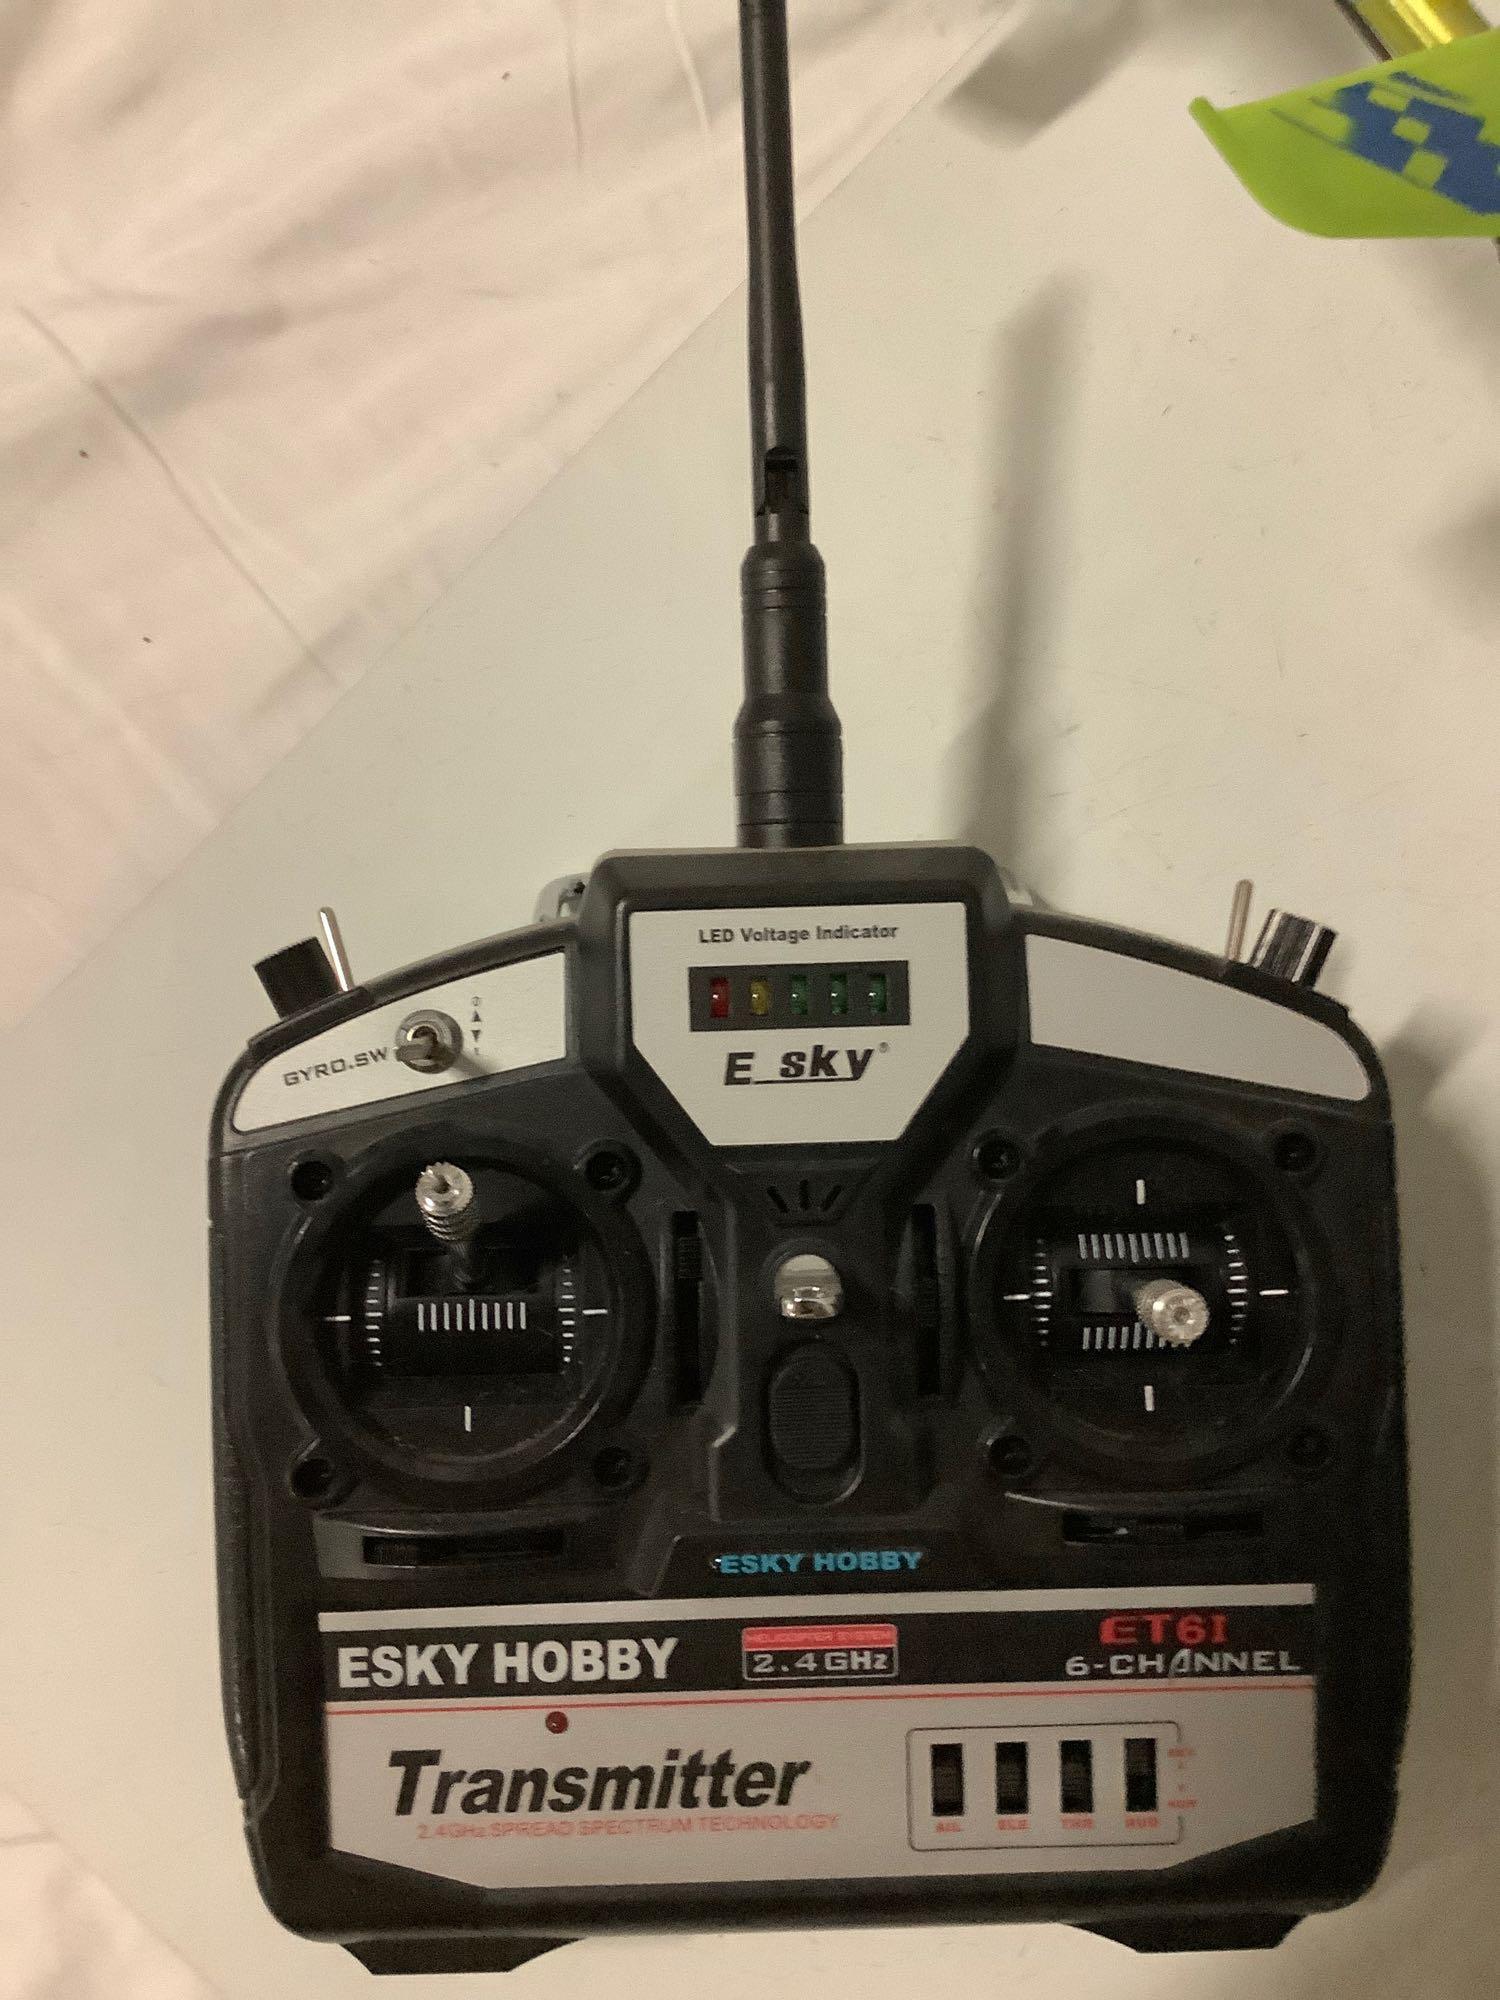 E Sky Hobby Pro 3D radio controlled helicopter, w/ 2 controllers, untested, sold as is. Approx 25 x